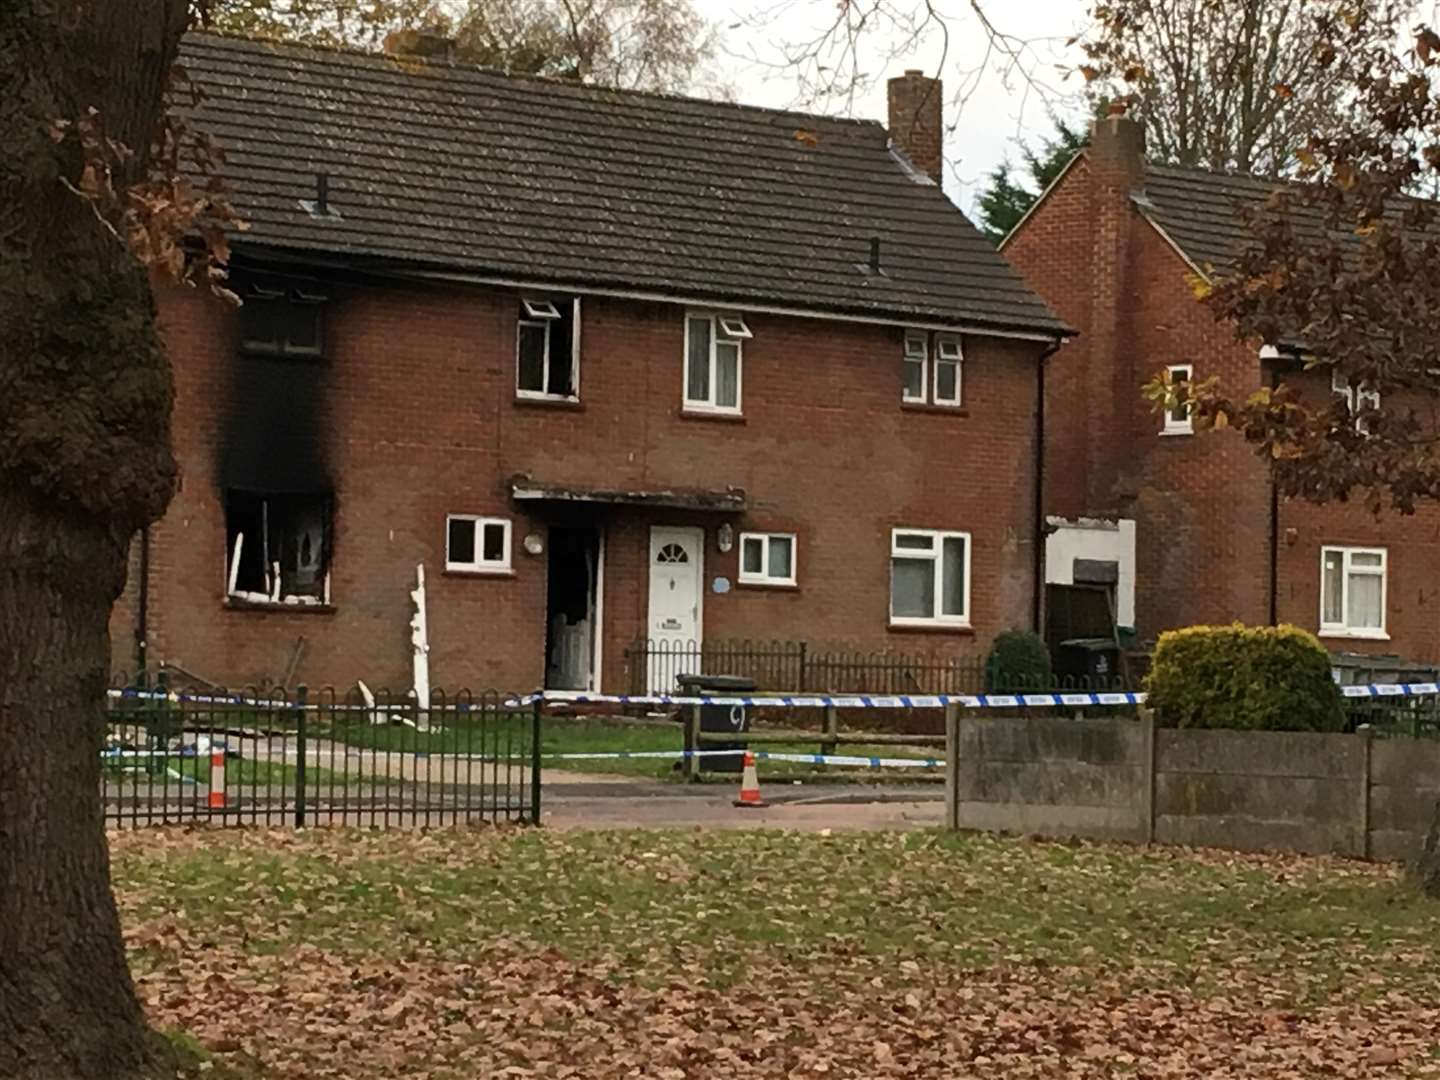 The burnt home is still cordoned off by police